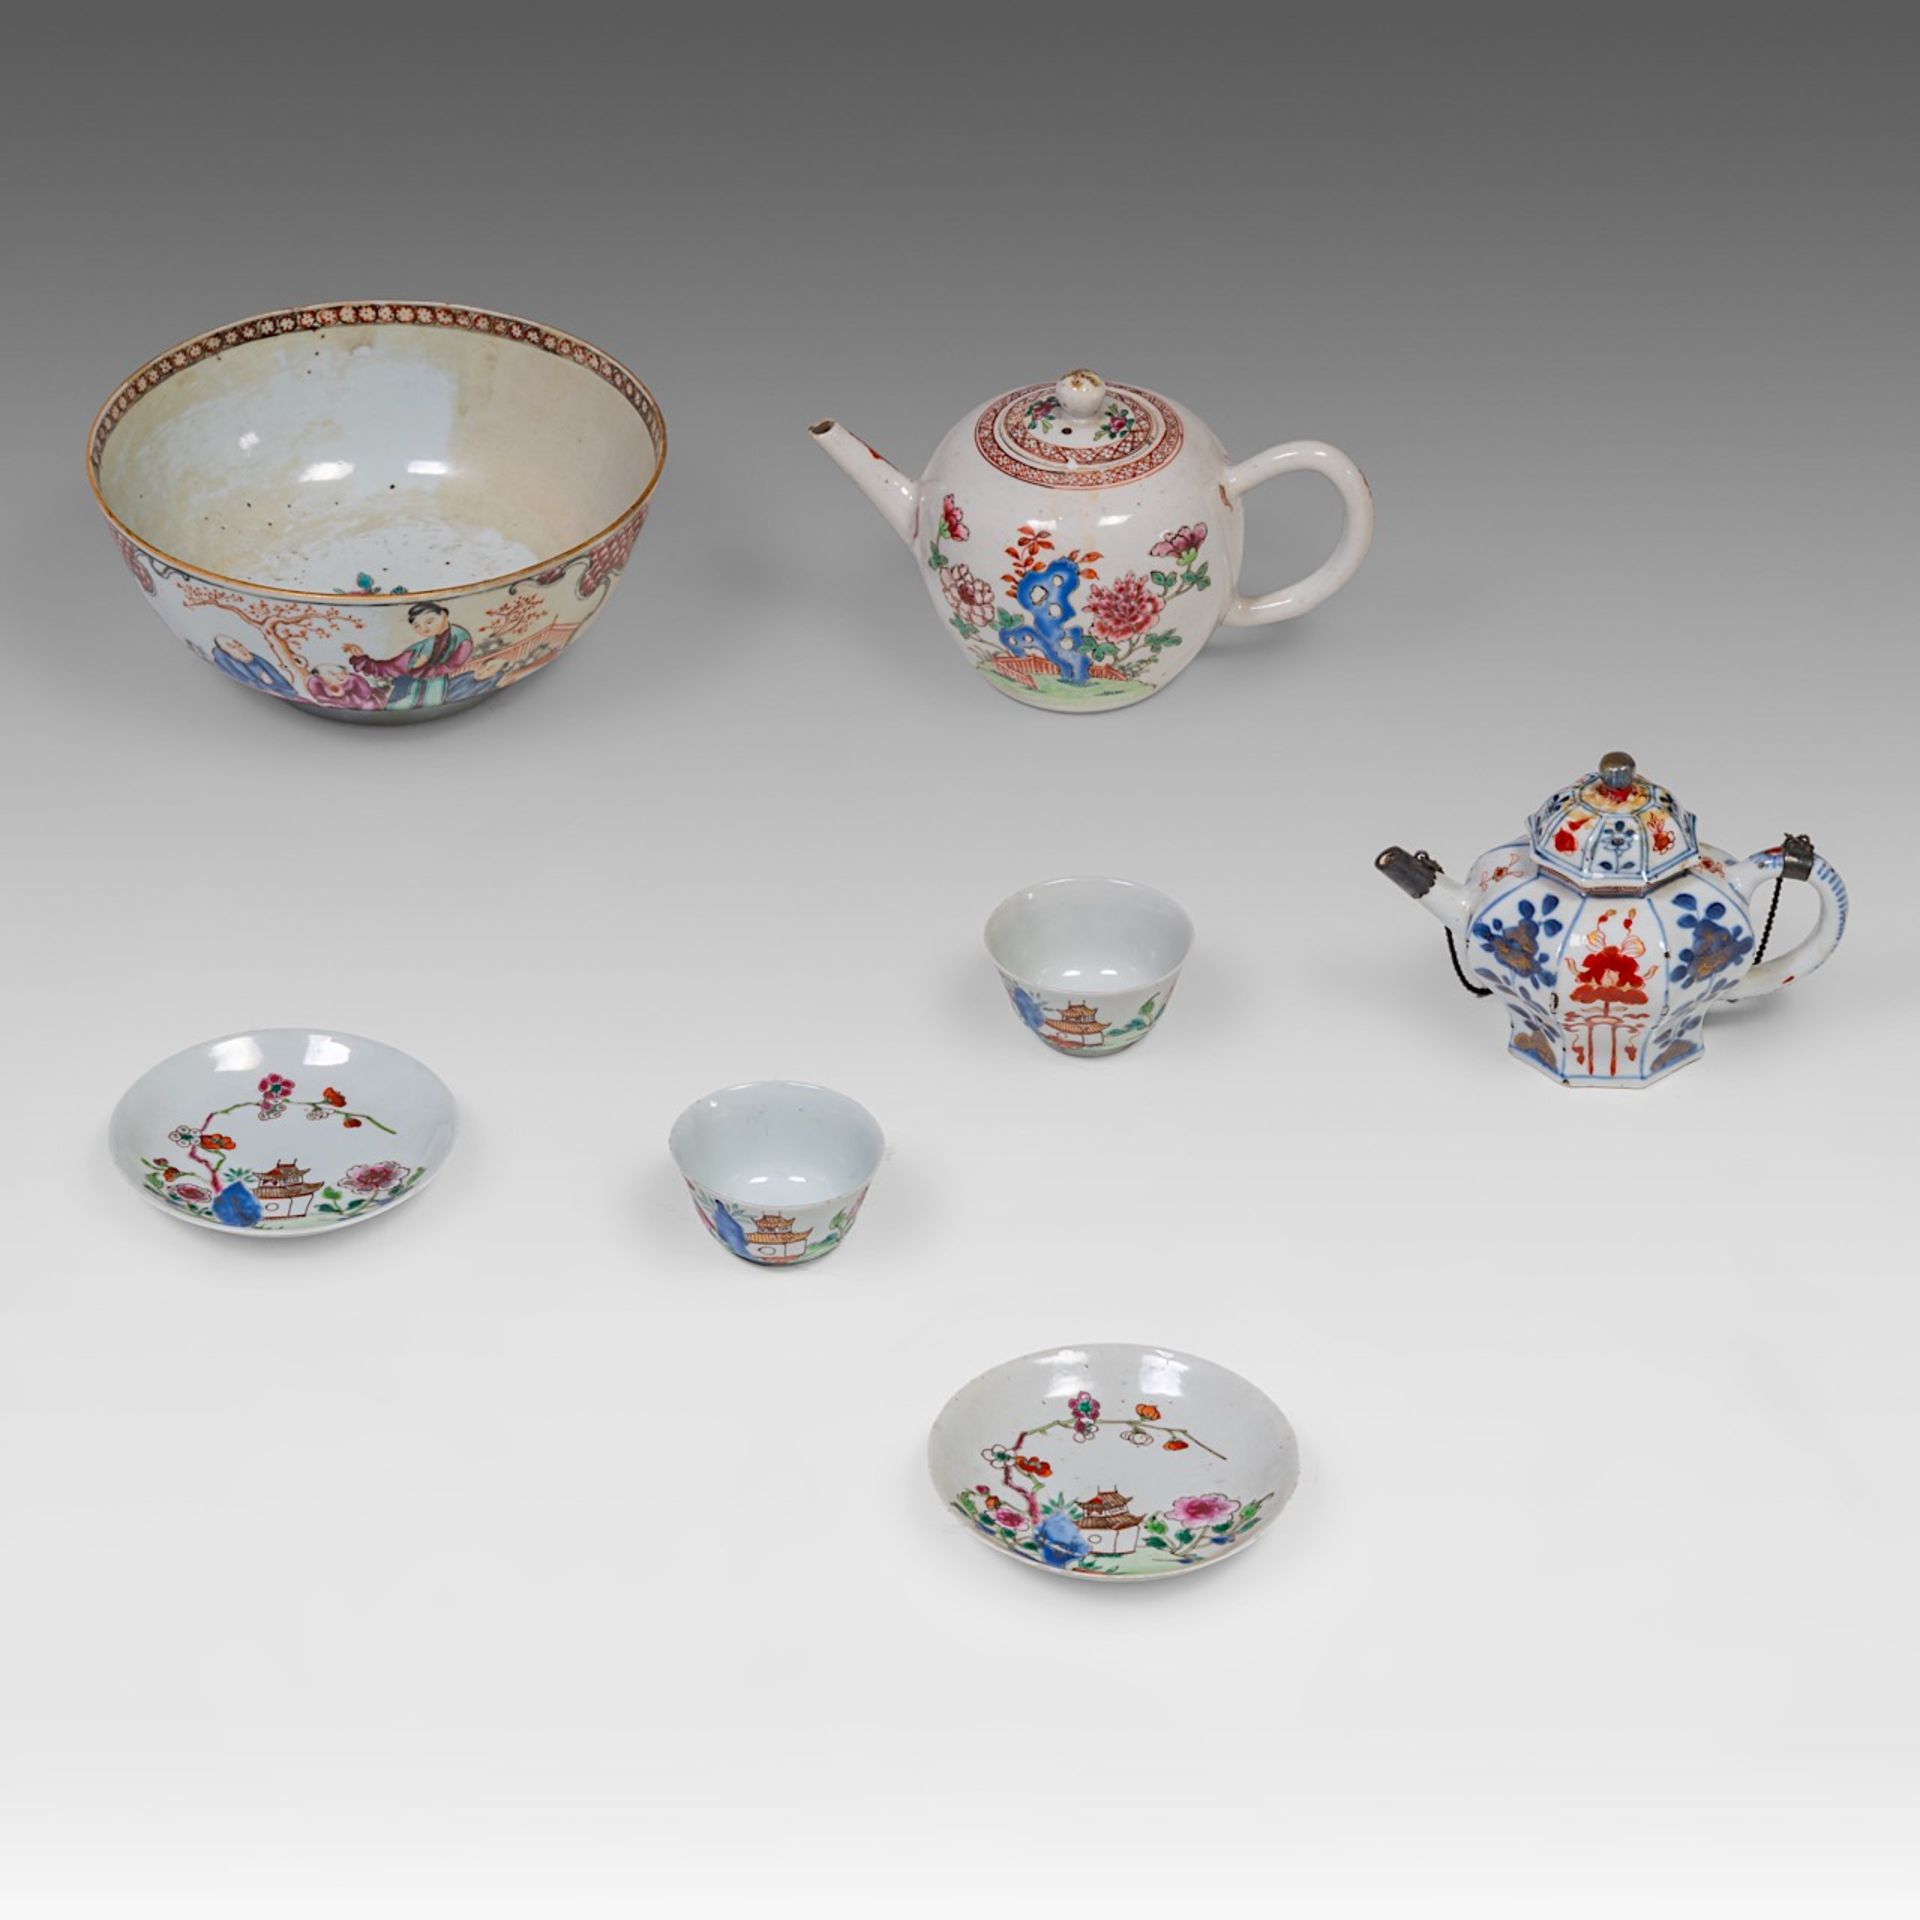 A small collection of Chinese famille rose and Imari export porcelain tea ware, 18thC, largest H 9 - - Image 17 of 17